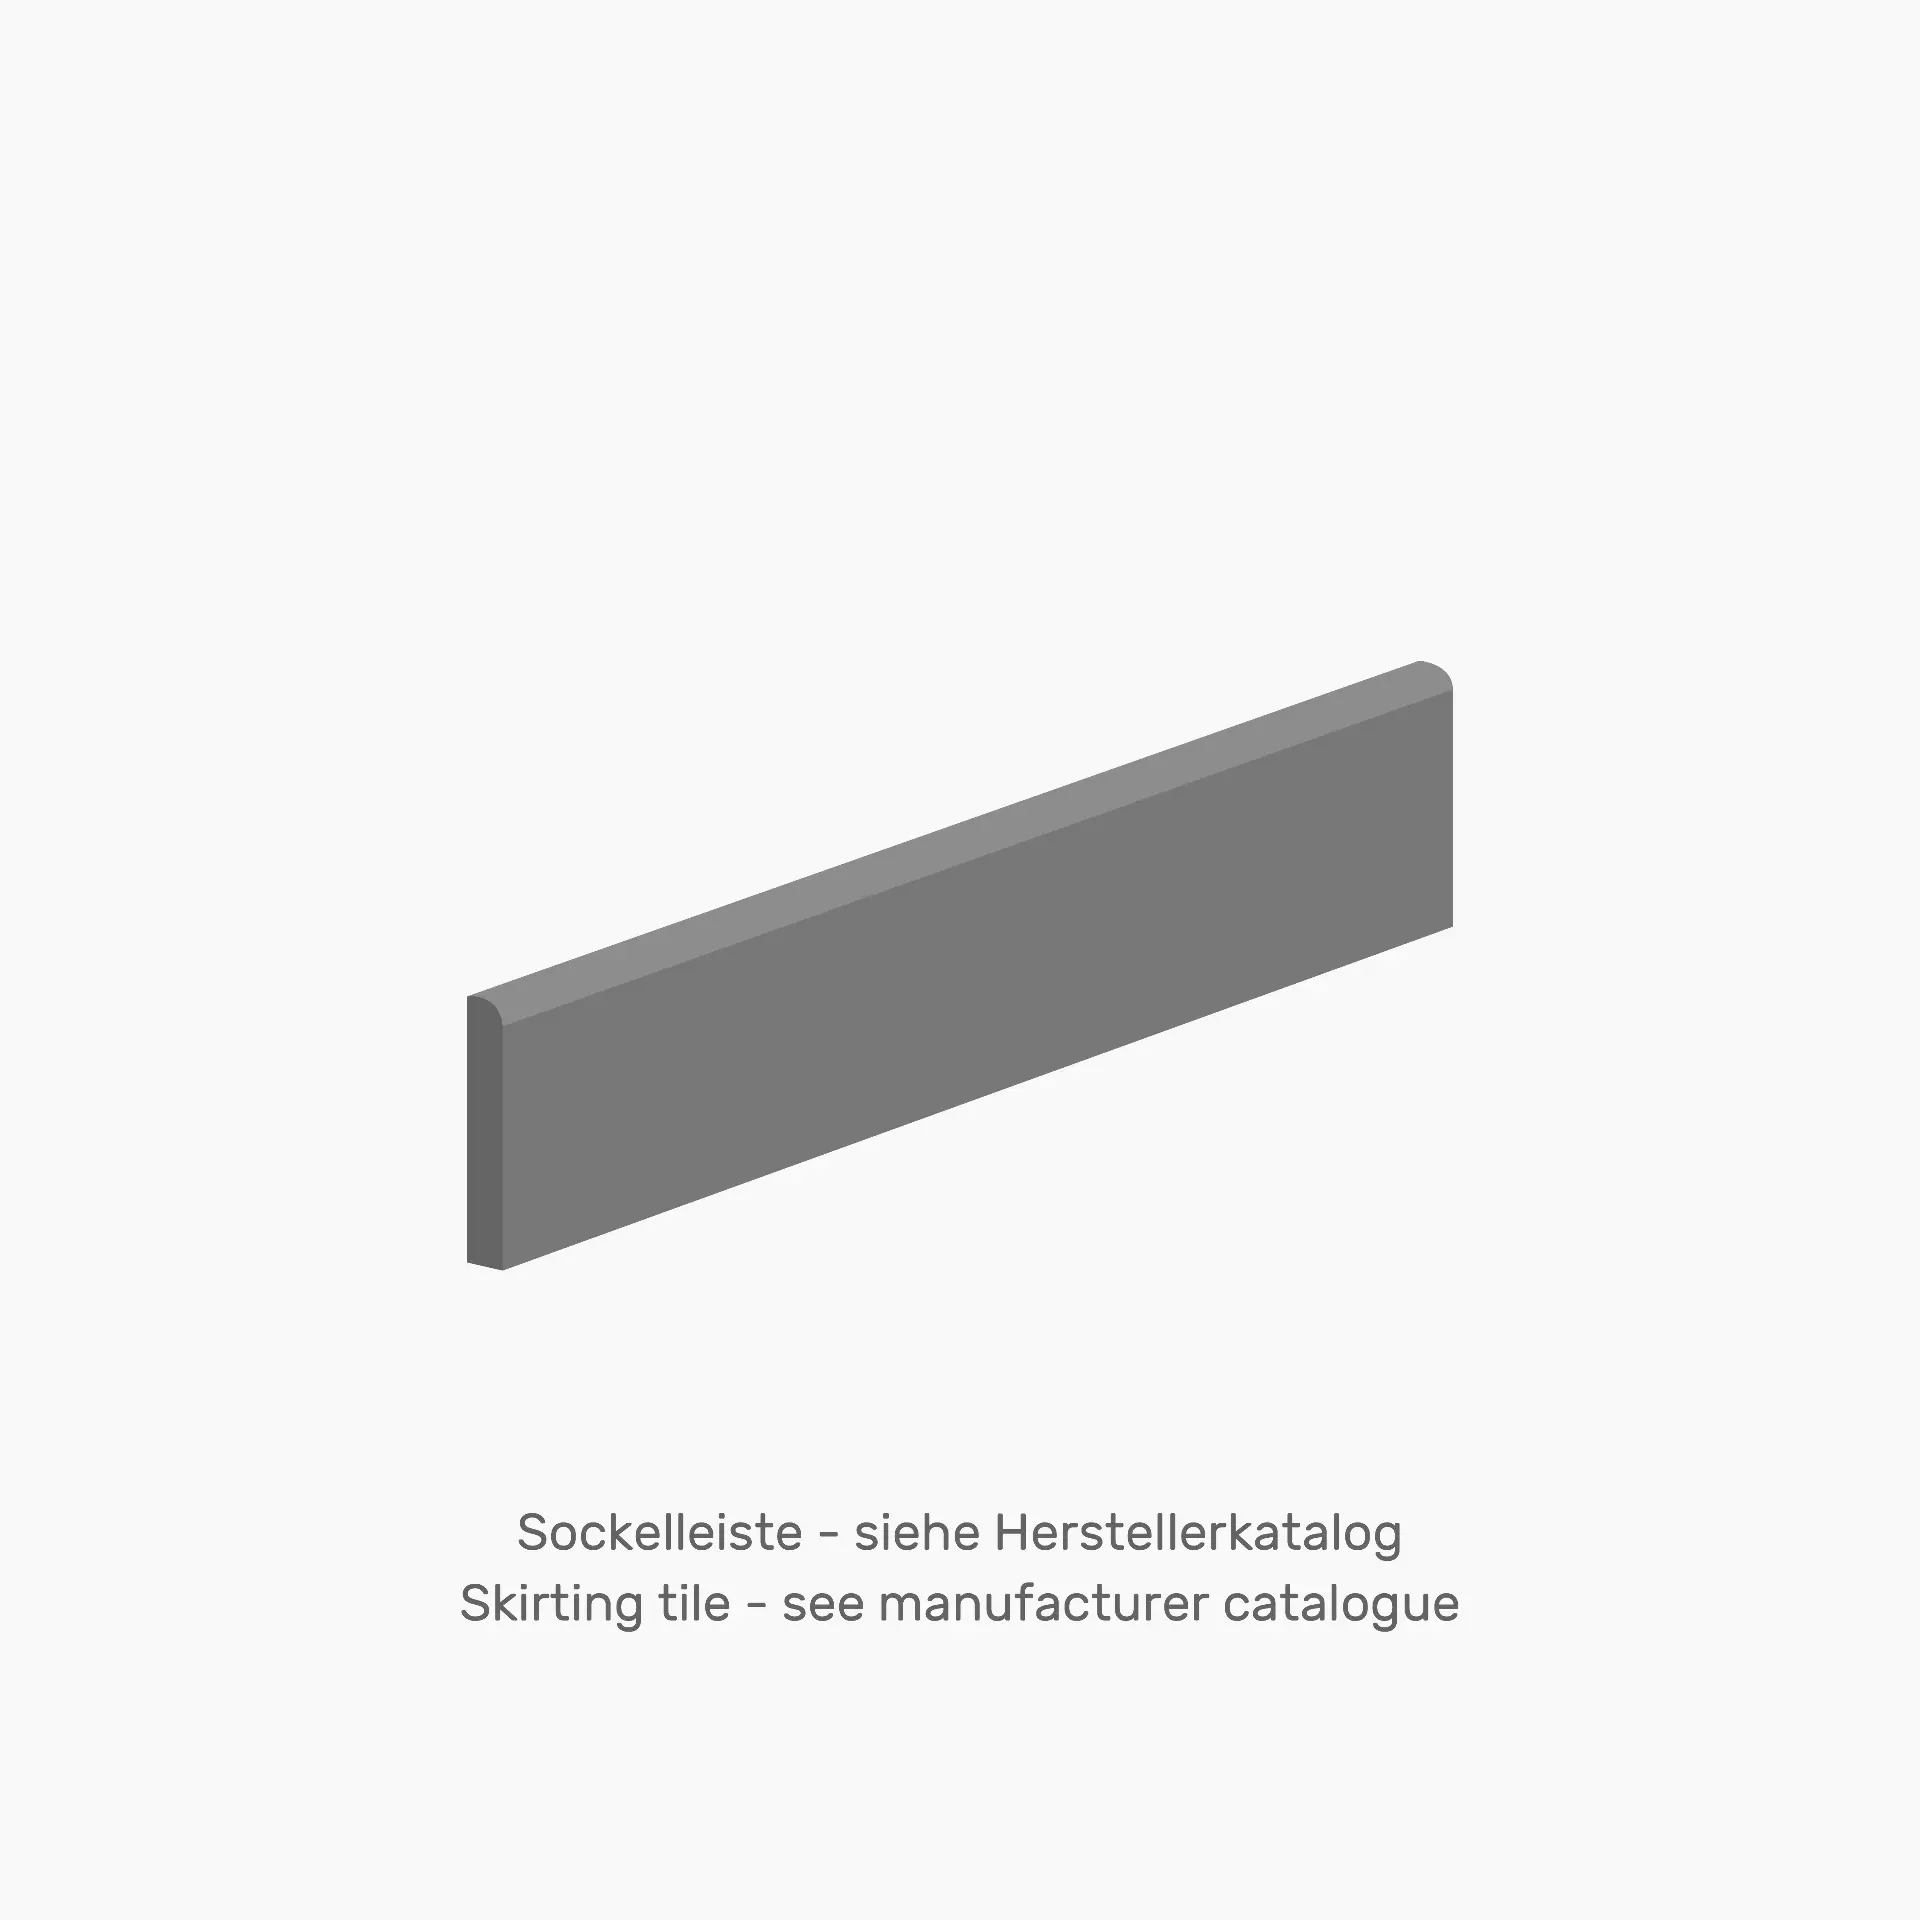 Sant Agostino Unionstone 2 Cedre Grey Natural Skirting board CSABCEGR60 7,3x60cm rectified 10mm